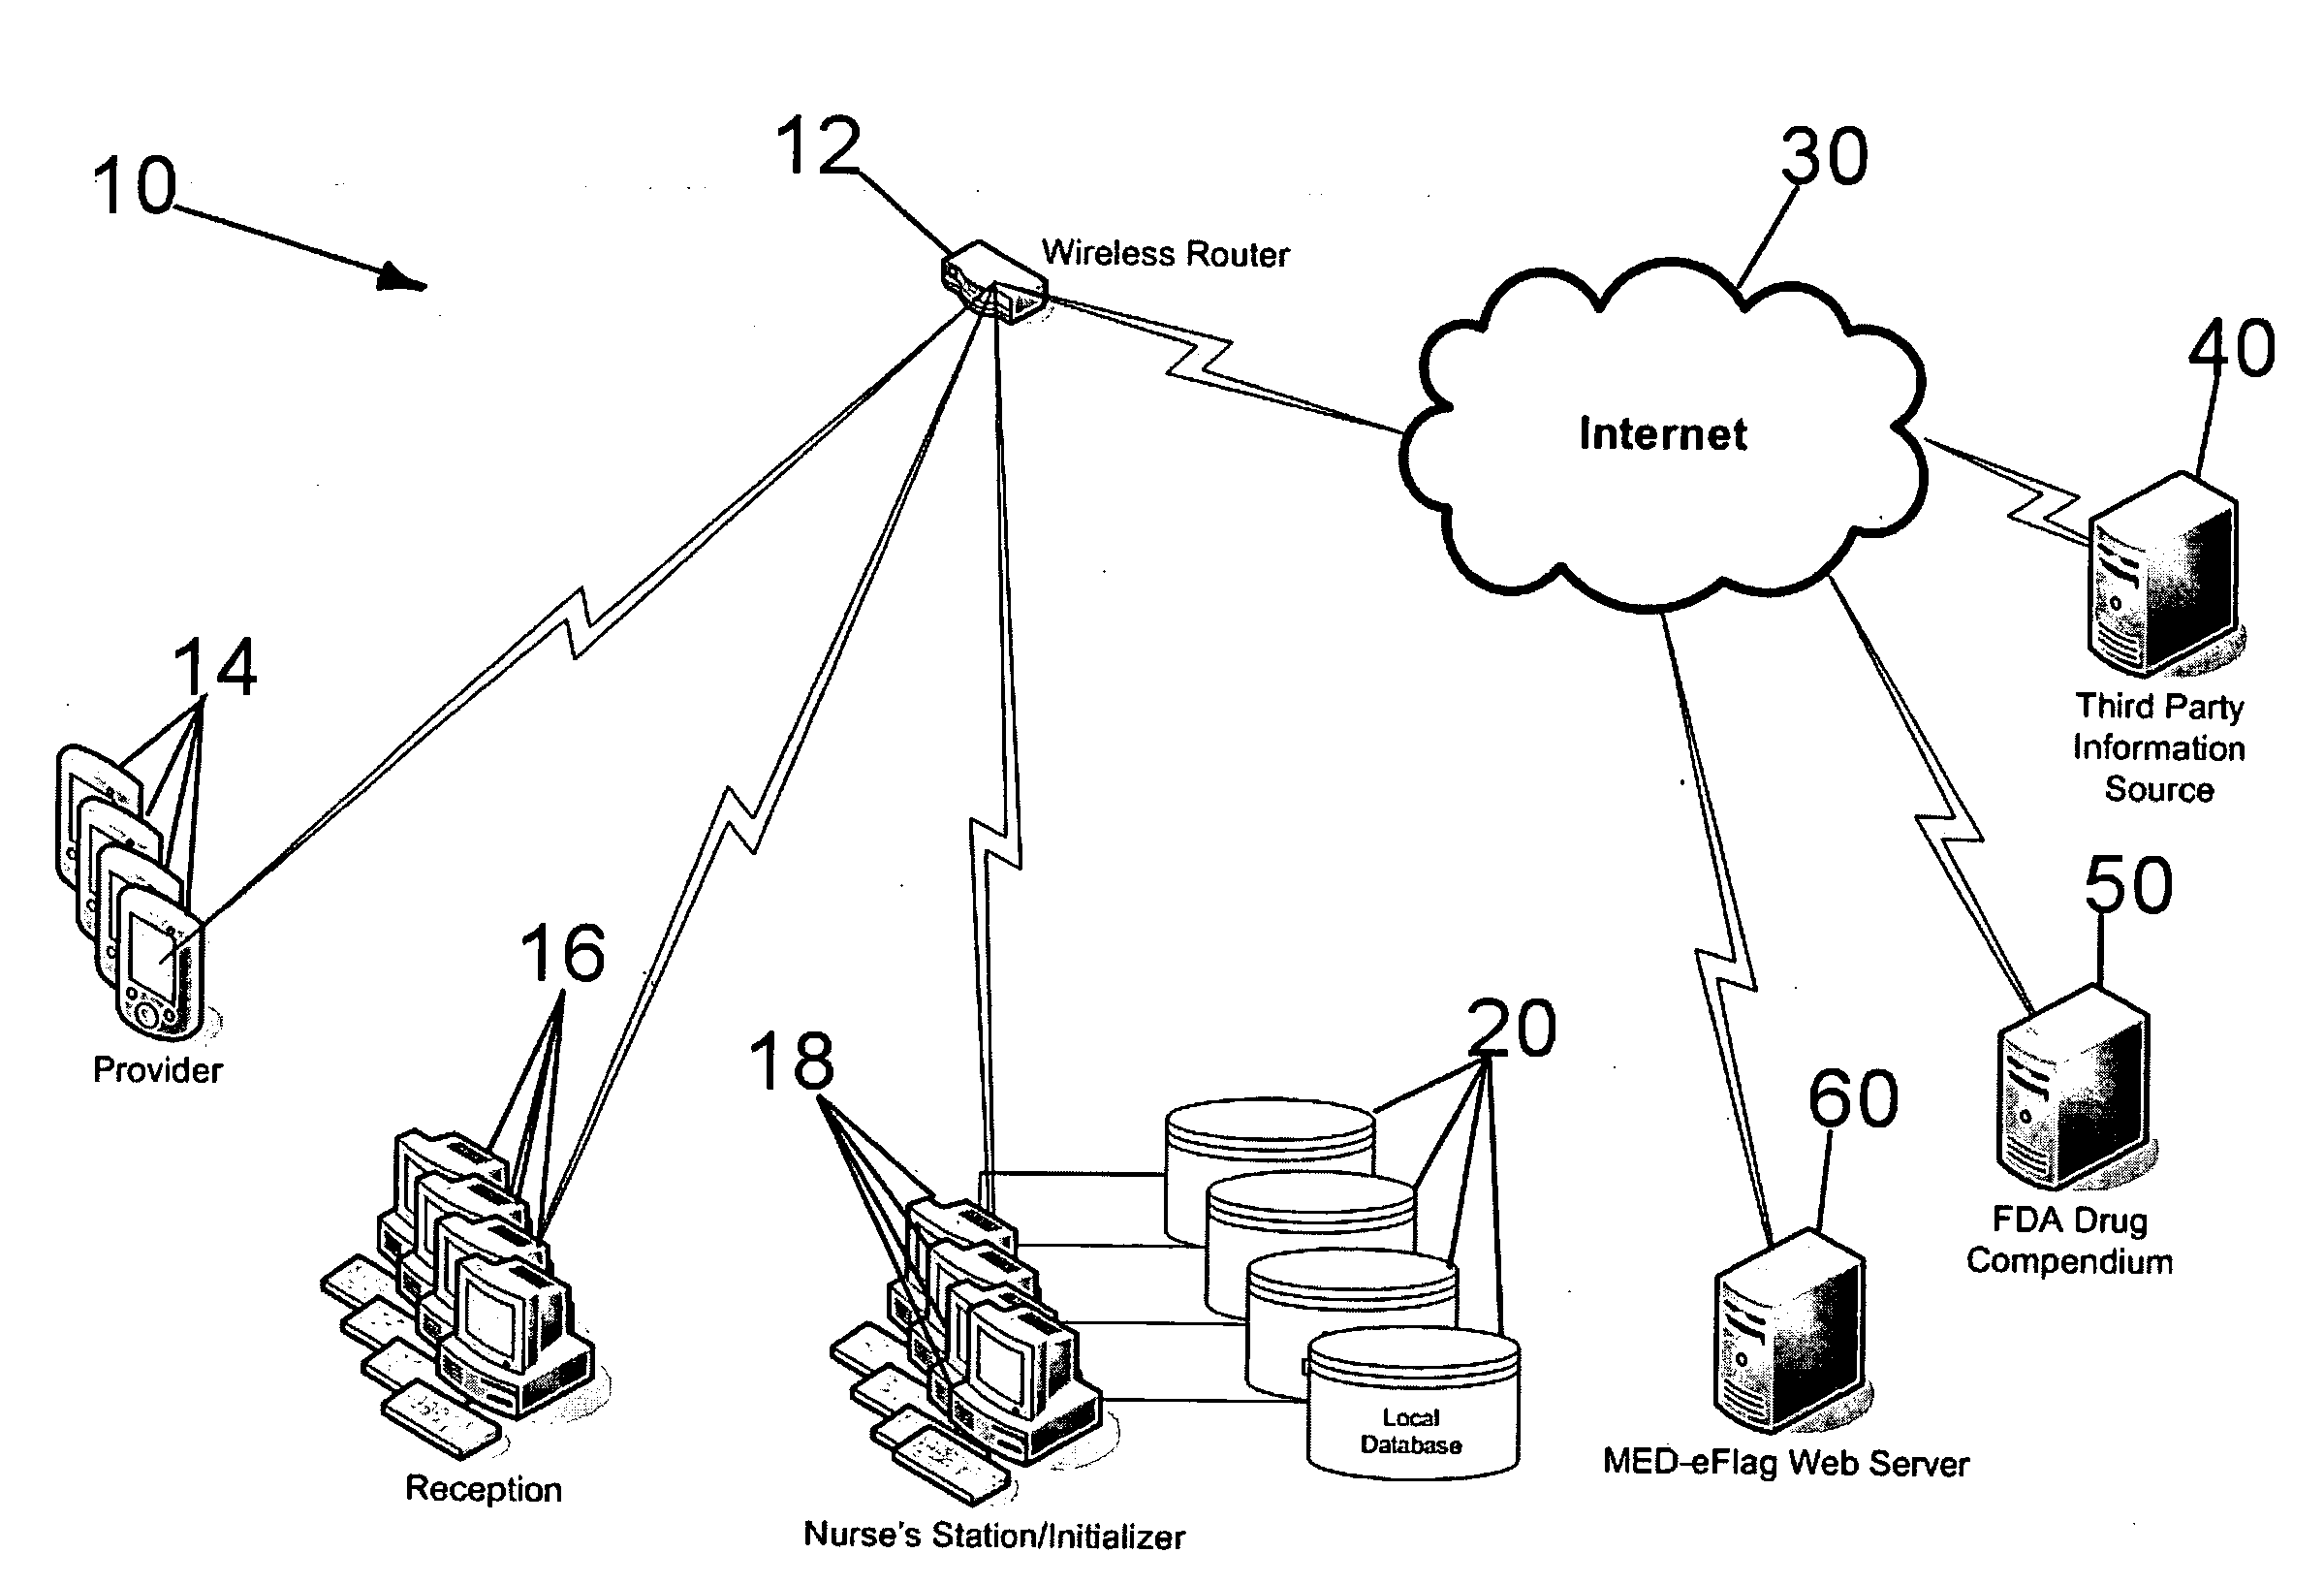 Systems, methods, and computer program products for facilitating communications, workflow, and task assignments in medical practices and clinics